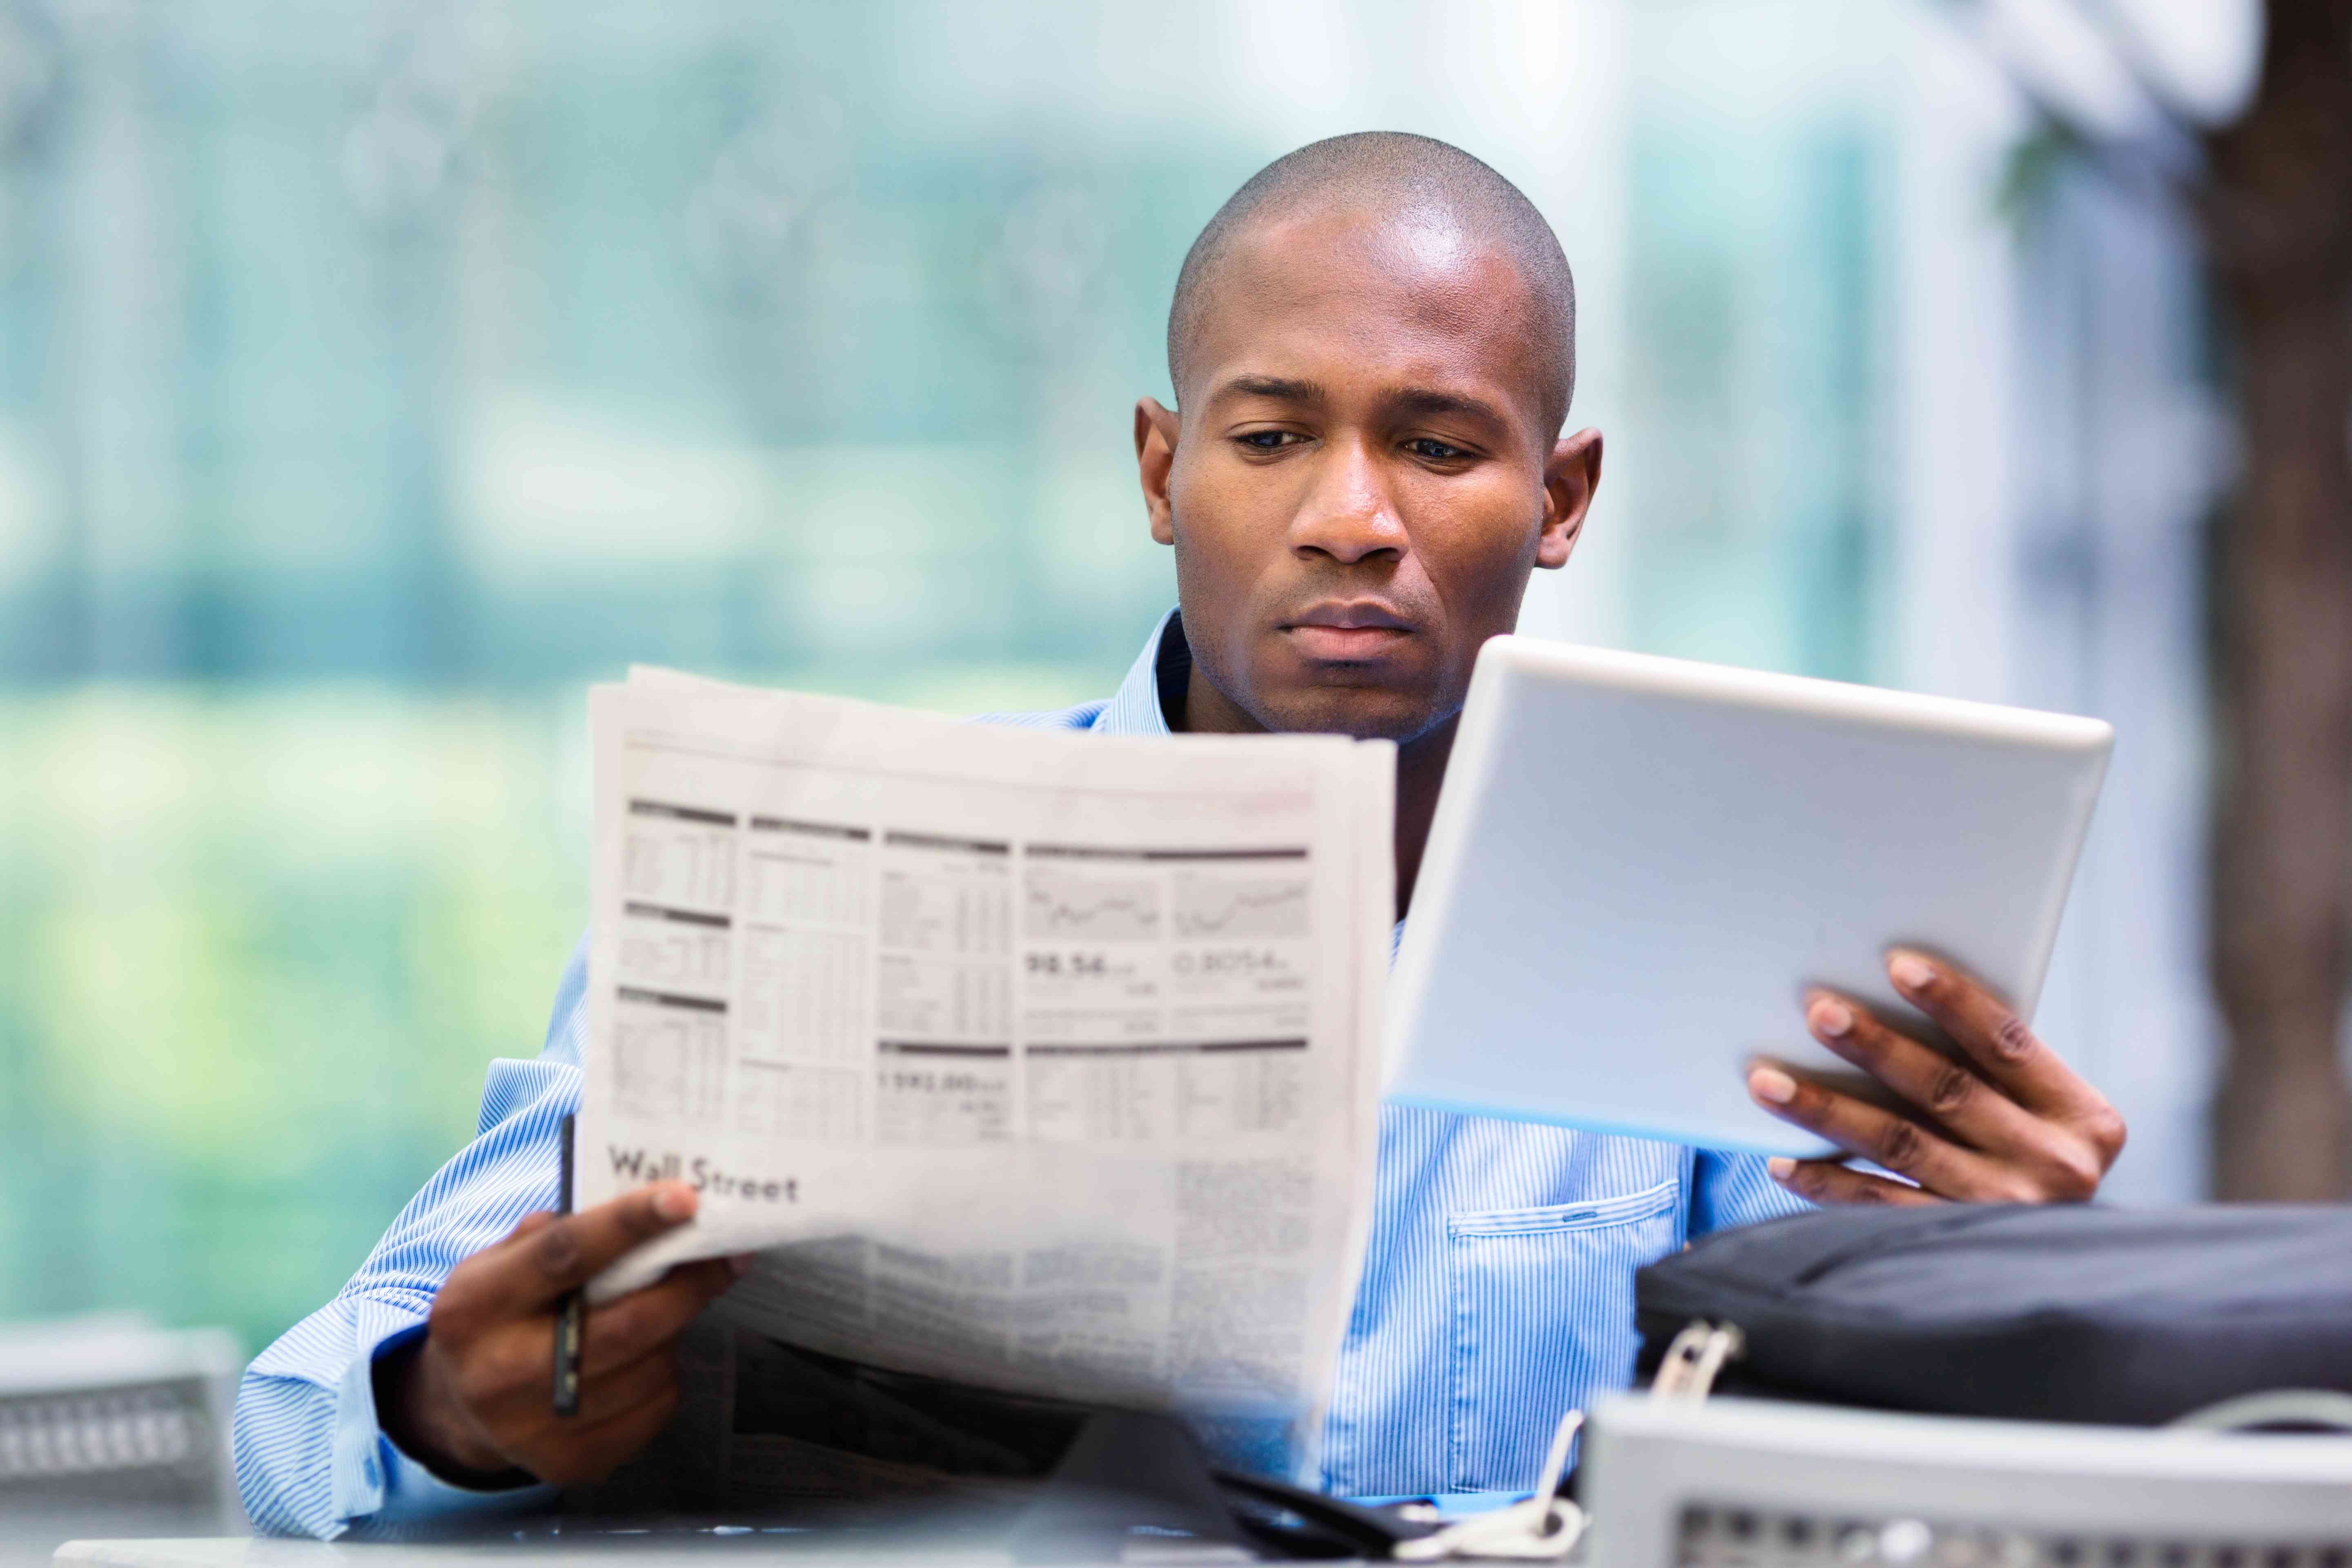 Investor reading over newspaper while holding a tablet